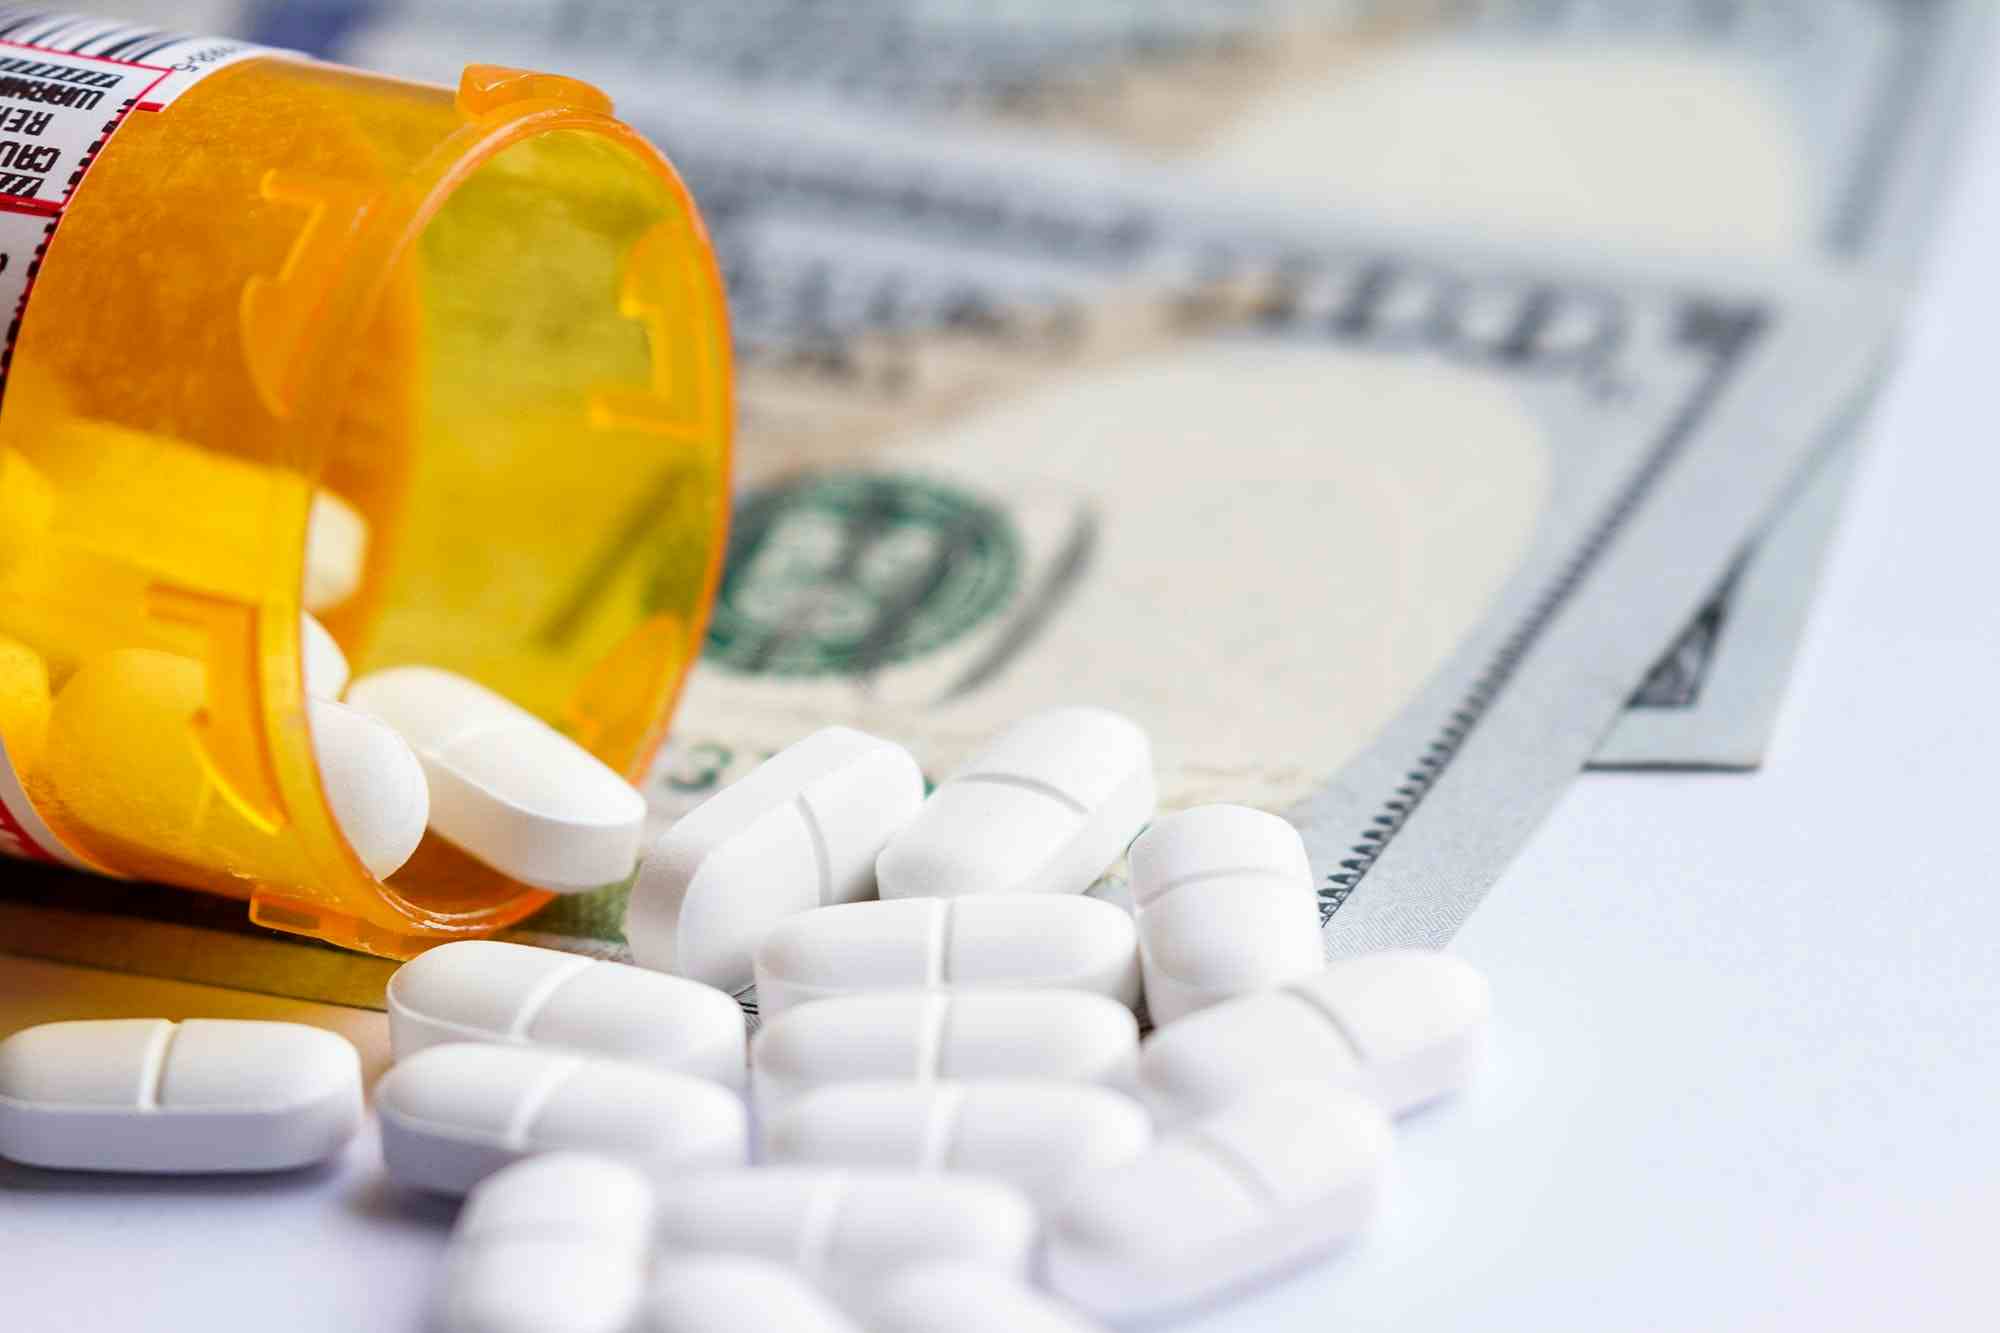 Prescription bottle, white pills, and United States currency